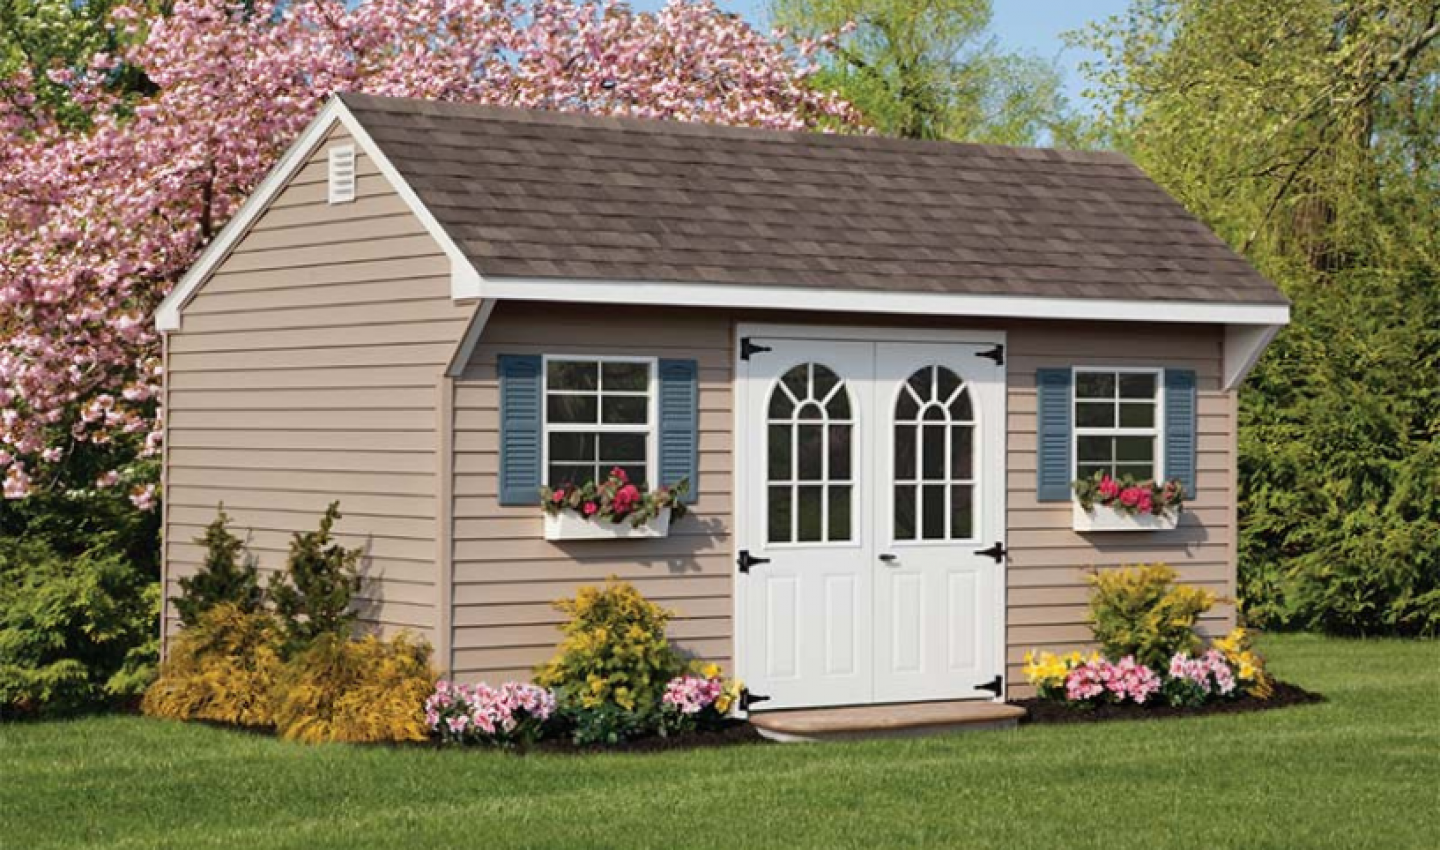 Sheds for Sale in Essex County